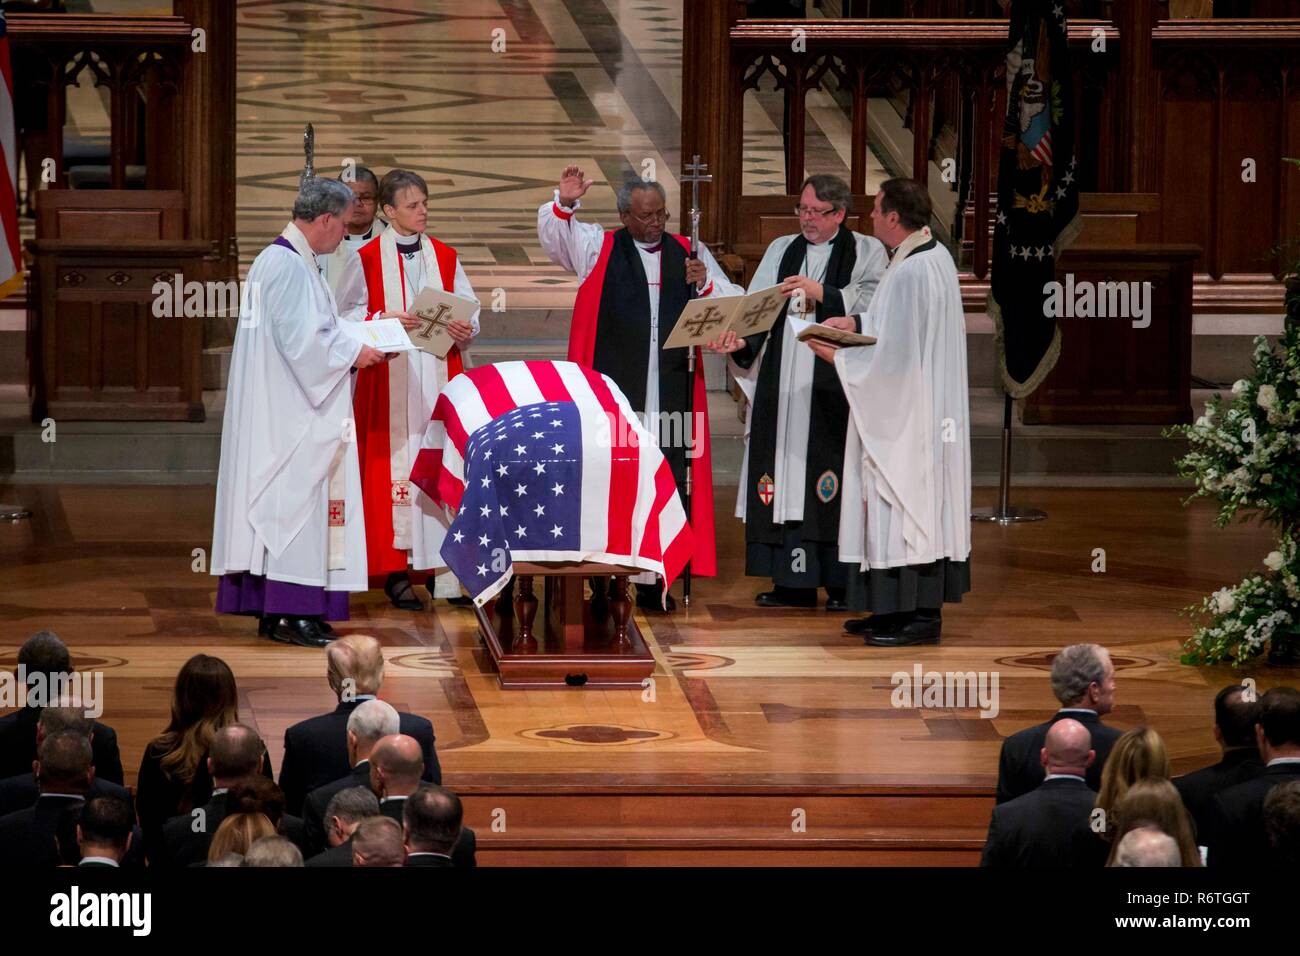 Washington DC, USA. 5th December, 2018. Presiding Bishop Michael Curry, center, and members of the Episcopal clergy perform the funeral rites over the flag draped casket of former U.S President George H.W. Bush during the State Funeral at the National Cathedral December 5, 2018 in Washington, DC. Bush, the 41st President, died in his Houston home at age 94. Credit: Planetpix/Alamy Live News Stock Photo